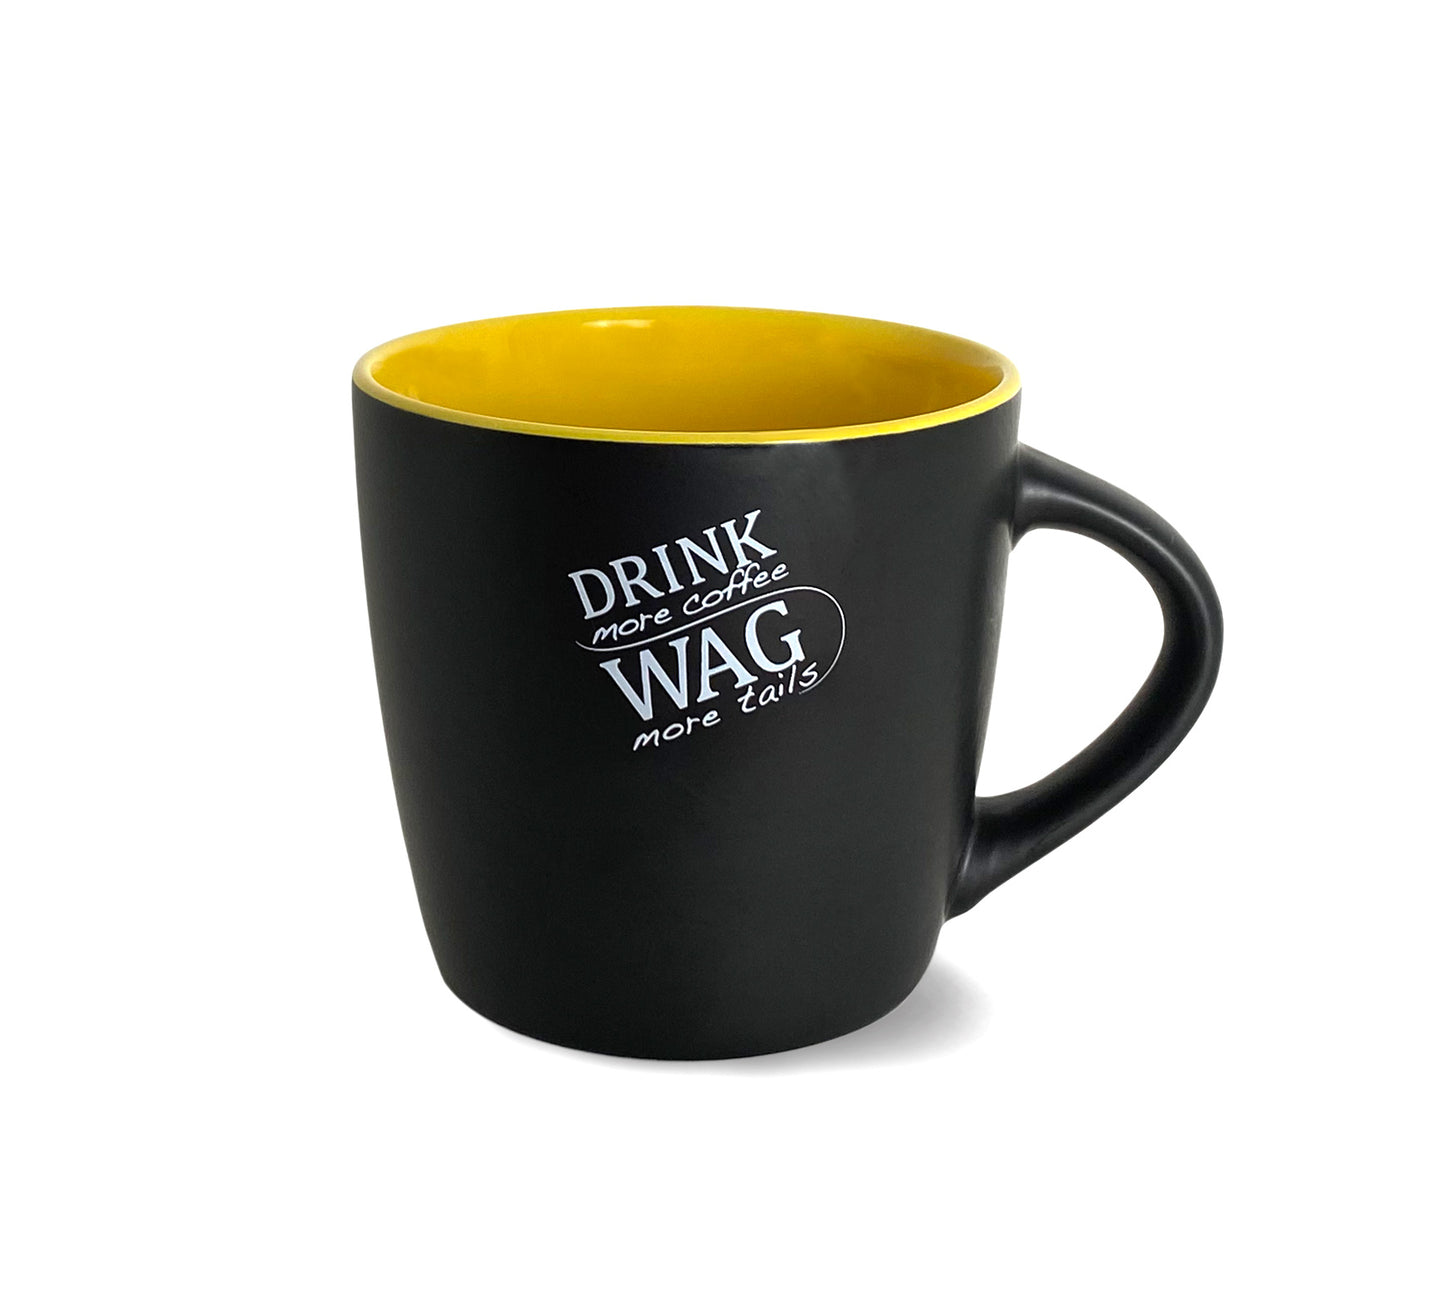 Fetch coffee ceramic mug with logo and saying. Holds 10 ounces. 